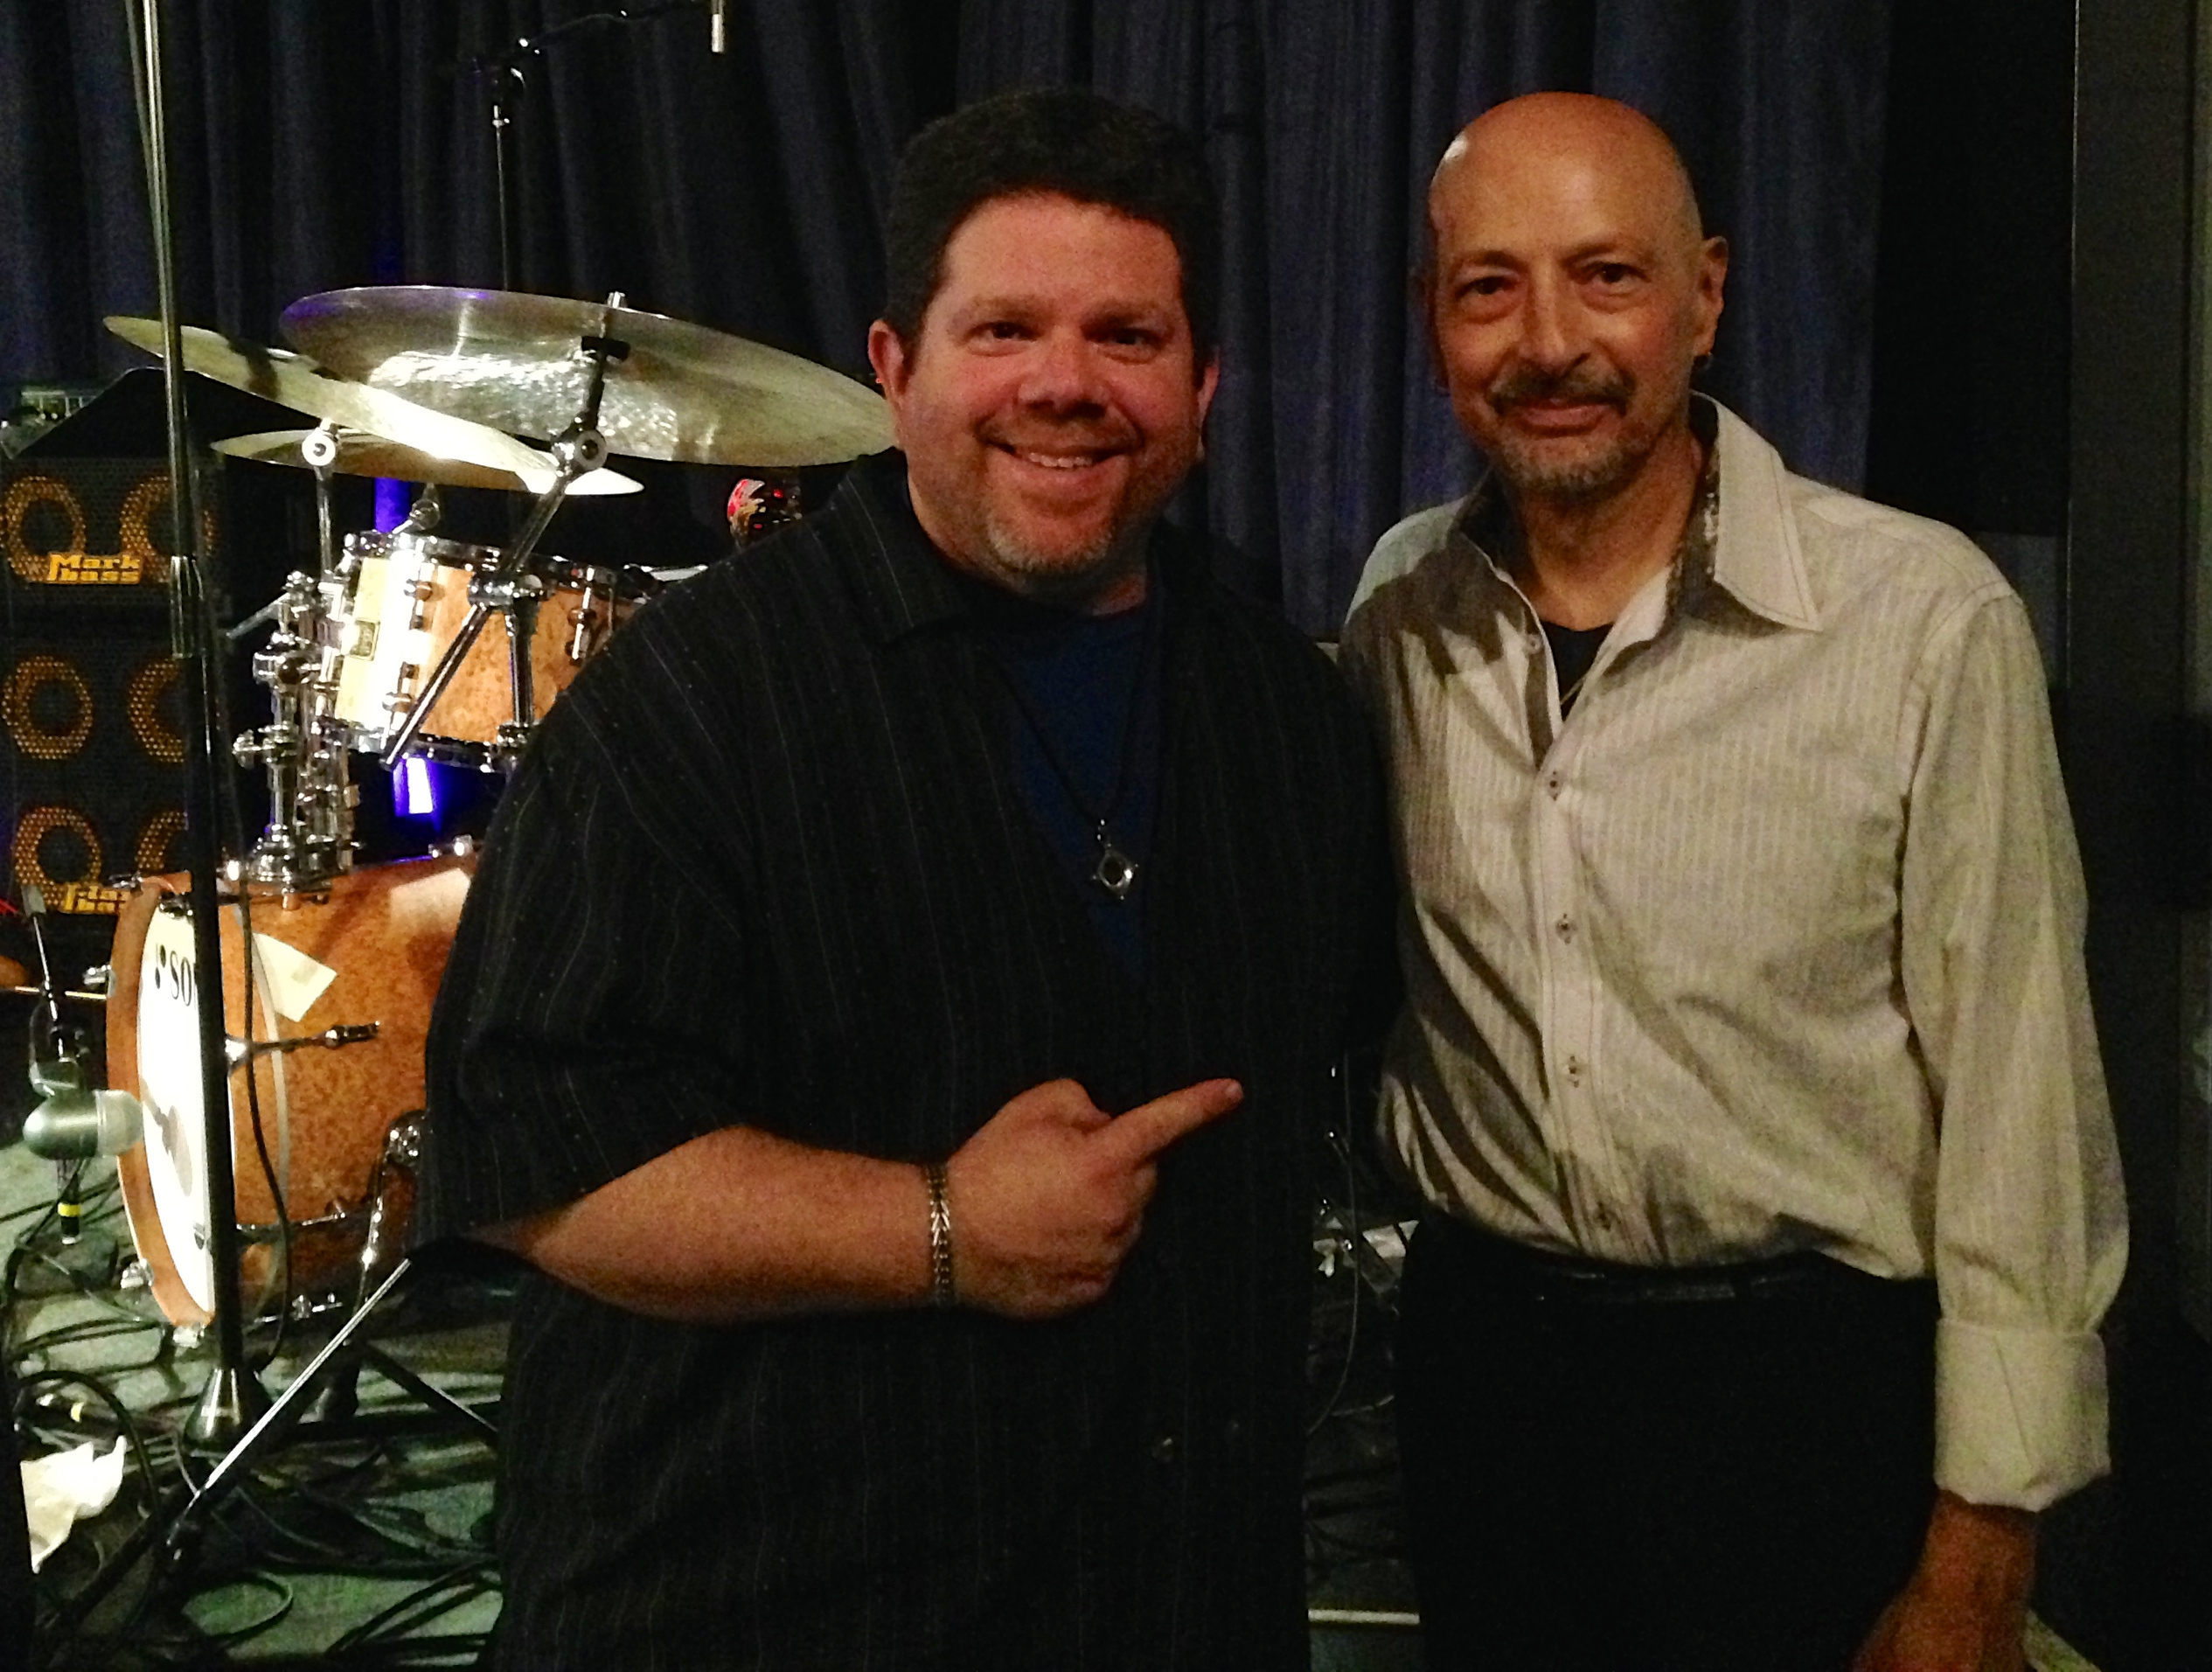 Drumming legend Steve Smith and I in NYC at the Iridium Jazz Club